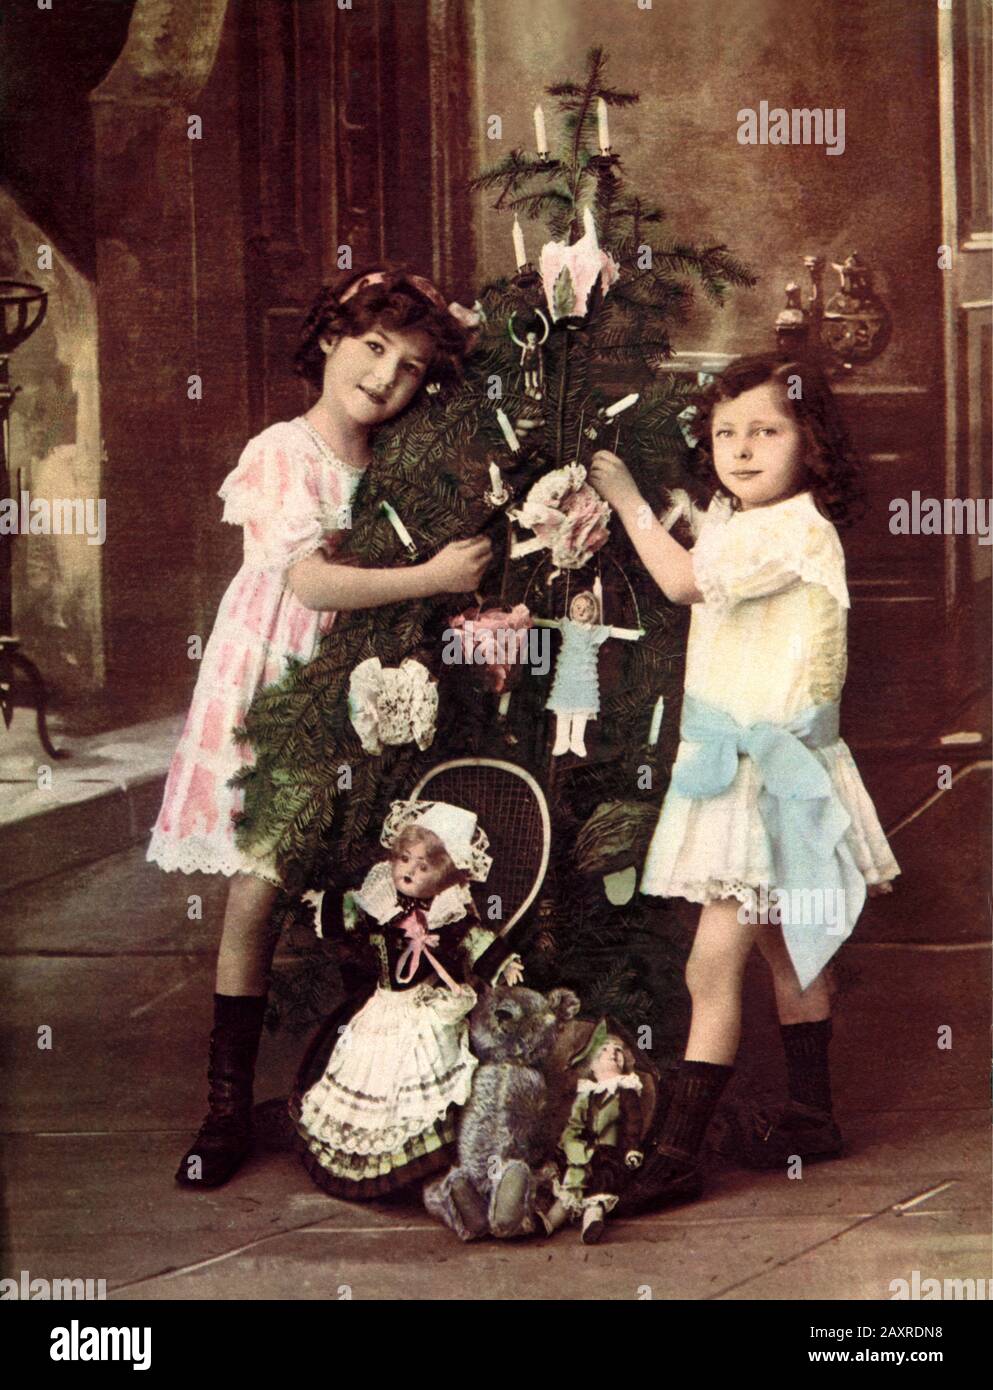 1900 ca , FRANCE :  Two little boy and girl in  CHRISTMAS  TIME , near a Xmas tress with with decorations and gifts from Santa Claus . Photo by undentifiend french photographer used for postcards in Italy  . - FOTO STORICHE - BABBO NATALE - pino - abete - pine - fir - HISTORY PHOTOS - FRANCIA - BUON NATALE - ALBERO di NATALE - Festività natalizie - BAMBINO - BAMBINI - BAMBINA - BAMBINE - CHILDREN - CHILD - CHILDHOOD - INFANZIA - NOVECENTO - '900 - 900's - XX CENTURY  - RELIGIONE CATTOLICA CRISTIANA - CATHOLIC RELIGION - fratello e sorella - brother and sister - fratelli - orsachiotto di peluch Stock Photo